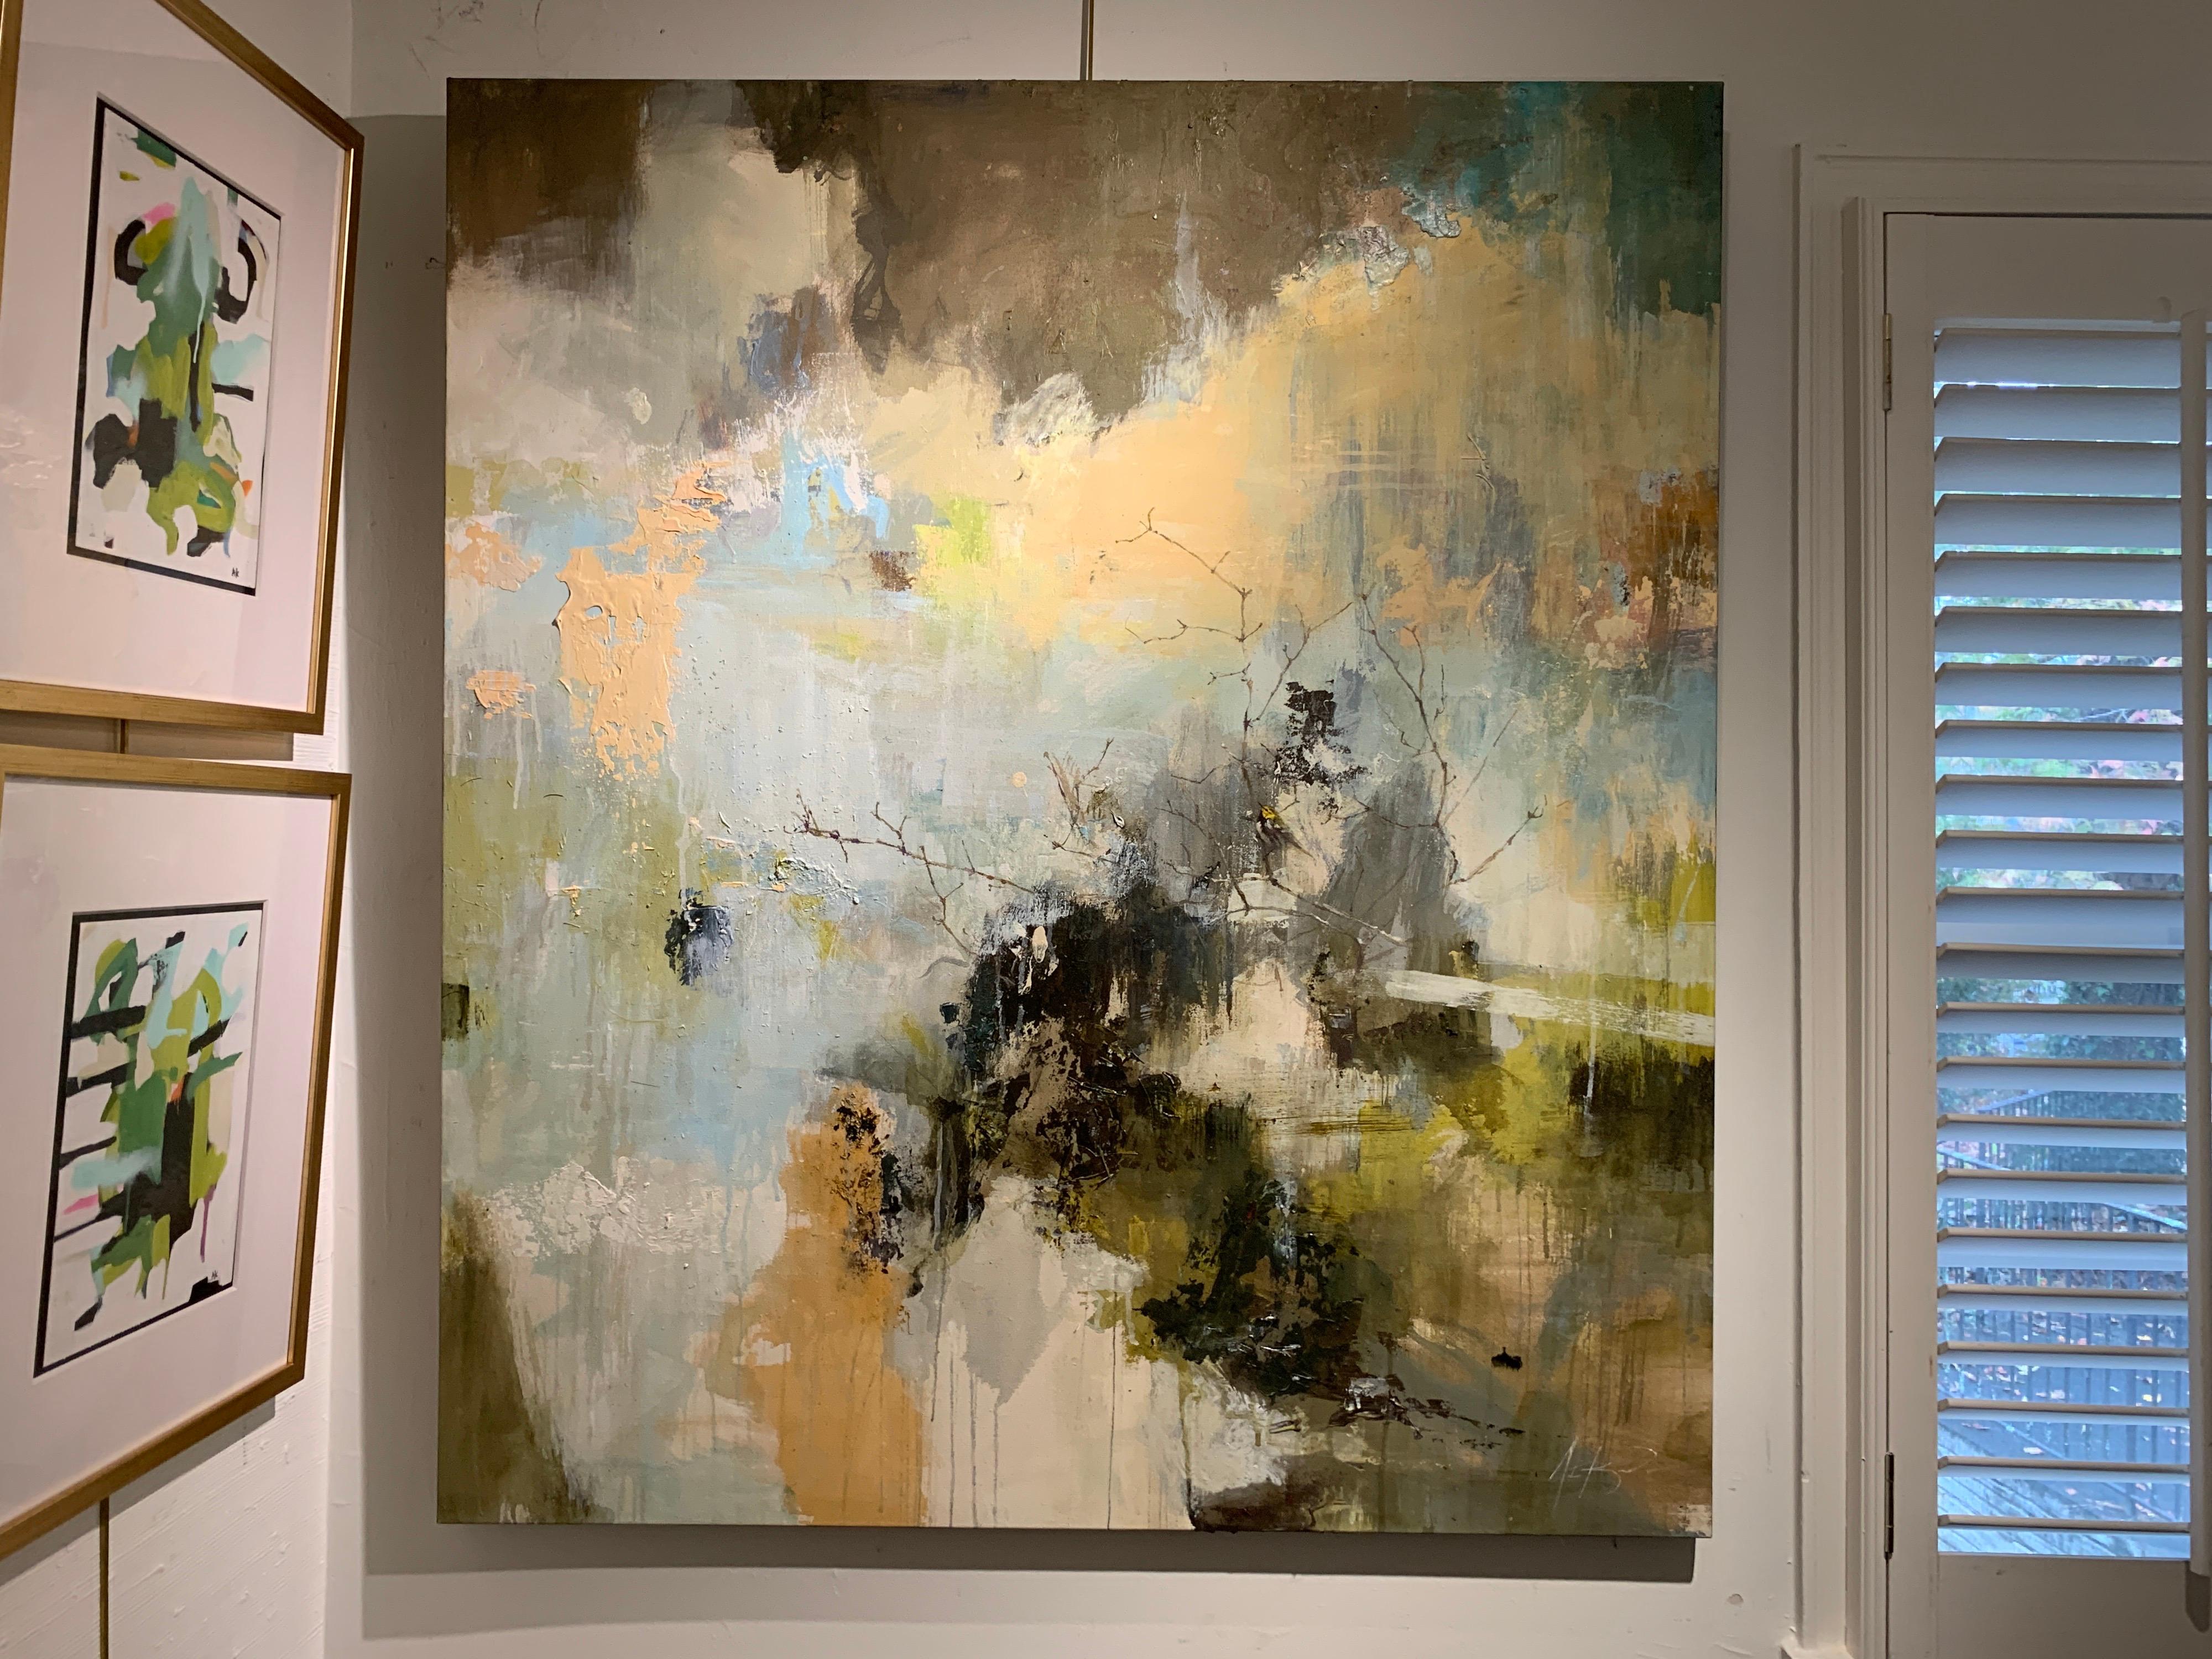 'It's Still an Early Morning (Black-throated Green Warbler)' is a large vertical mixed media on canvas abstract painting created by American artist Justin Kellner in 2020. Featuring a neutral palette among other tones, the painting presents an